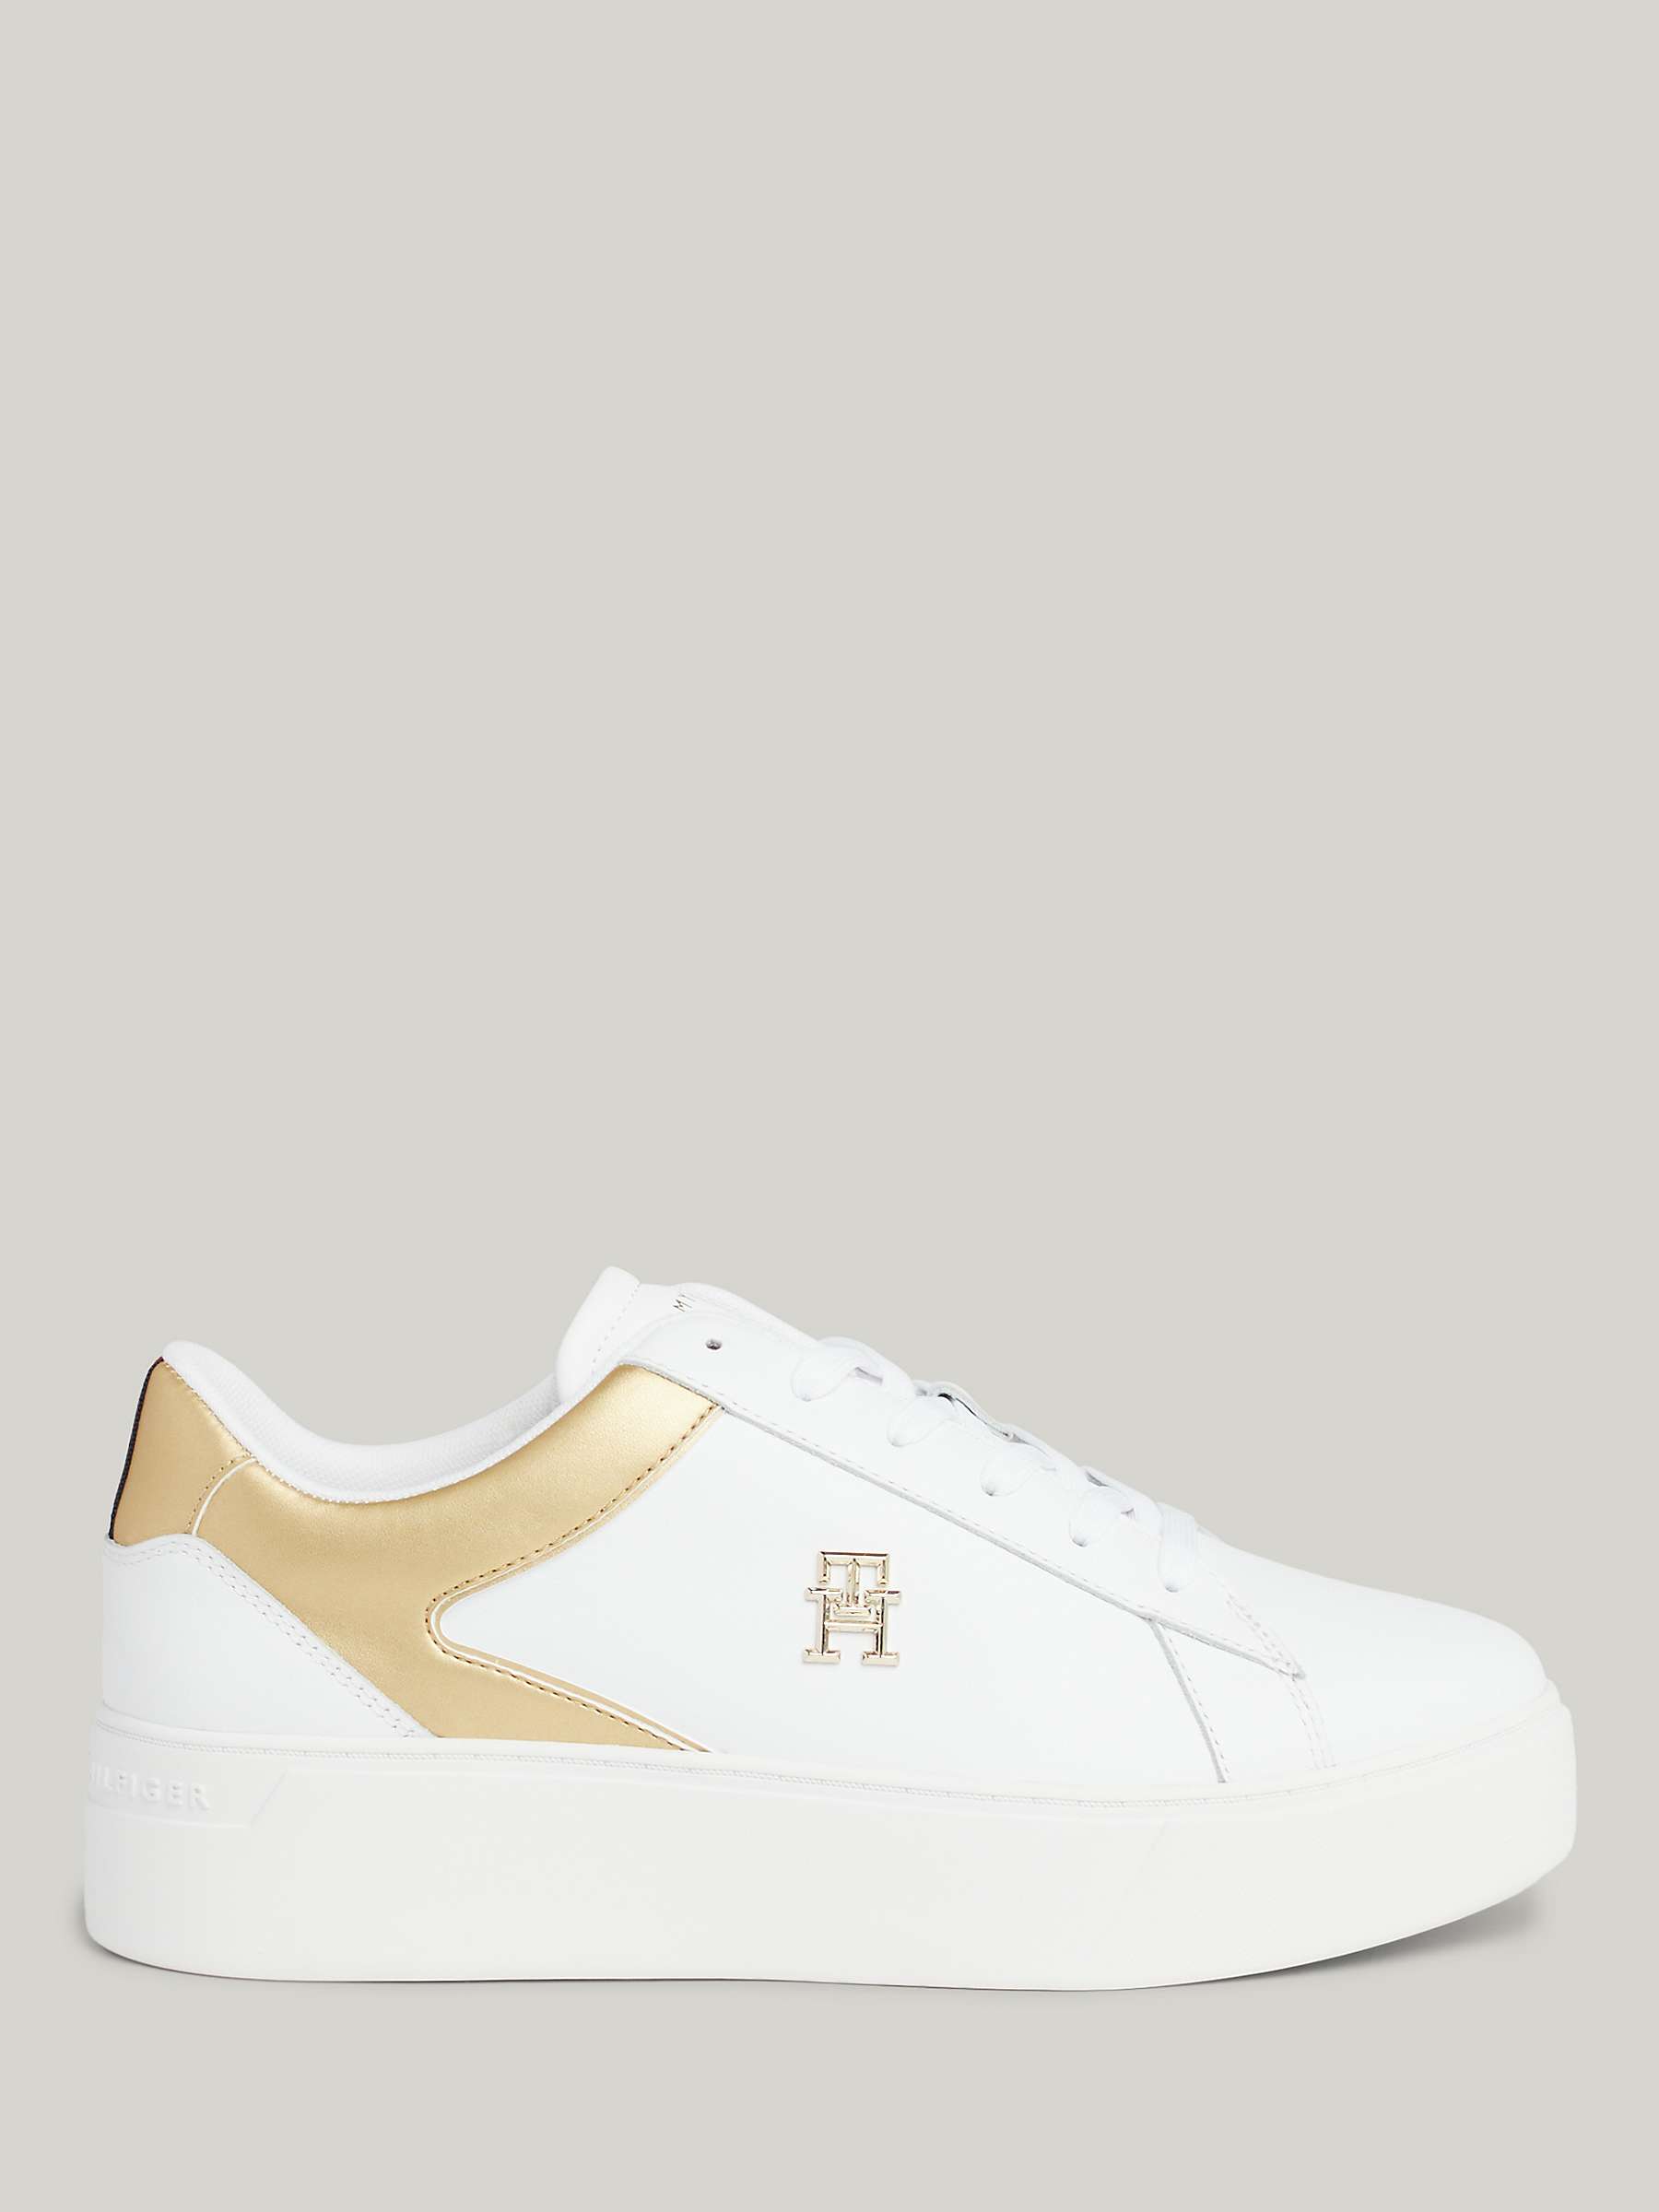 Buy Tommy Hilfiger Leather Lace-Up Platform Trainers, White/Gold Online at johnlewis.com